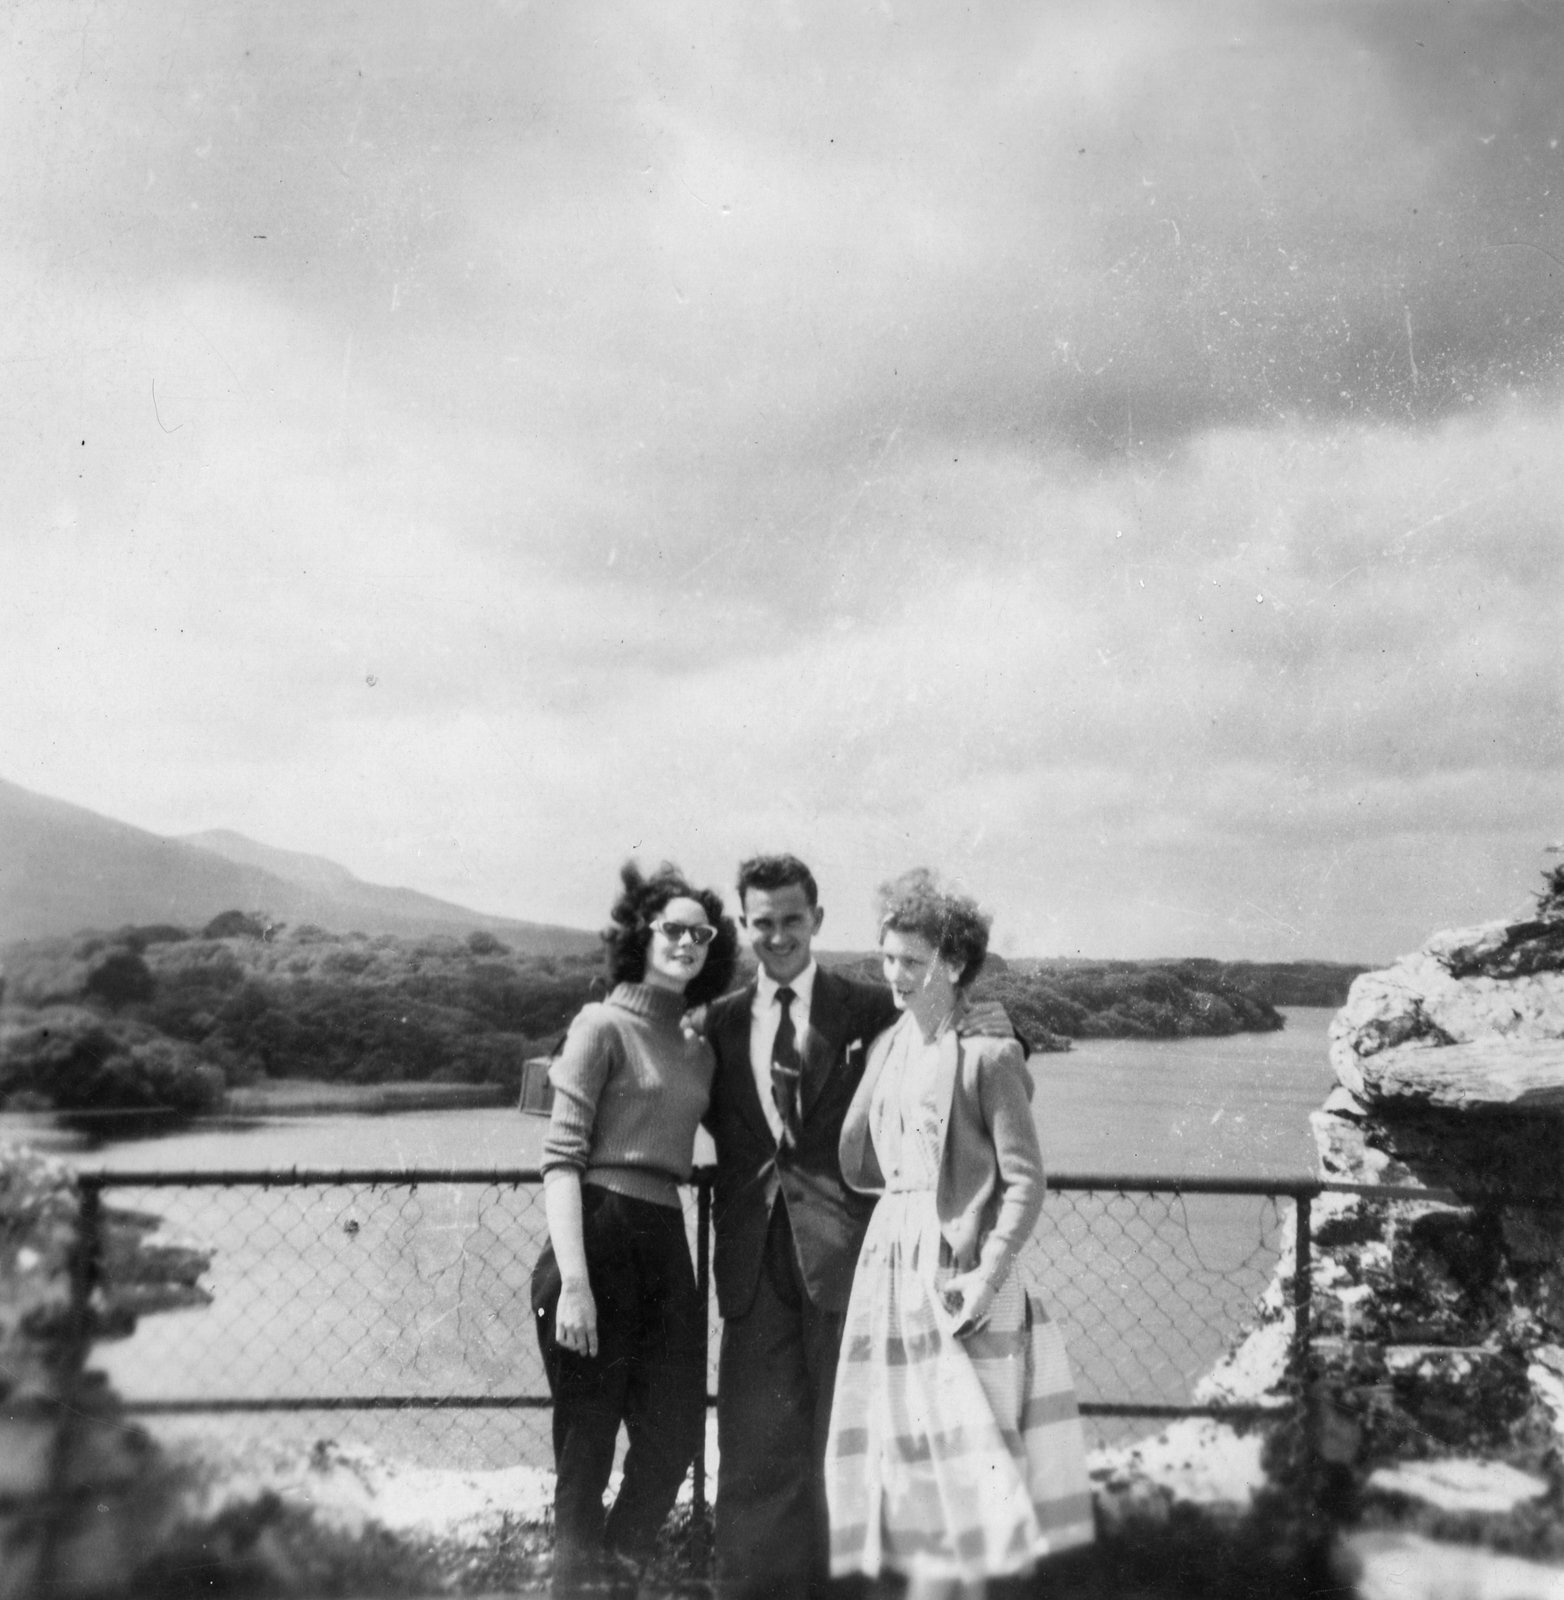 Sally Morgan (née Morton) Holidaying on the Isle of Man with friends in 1956.